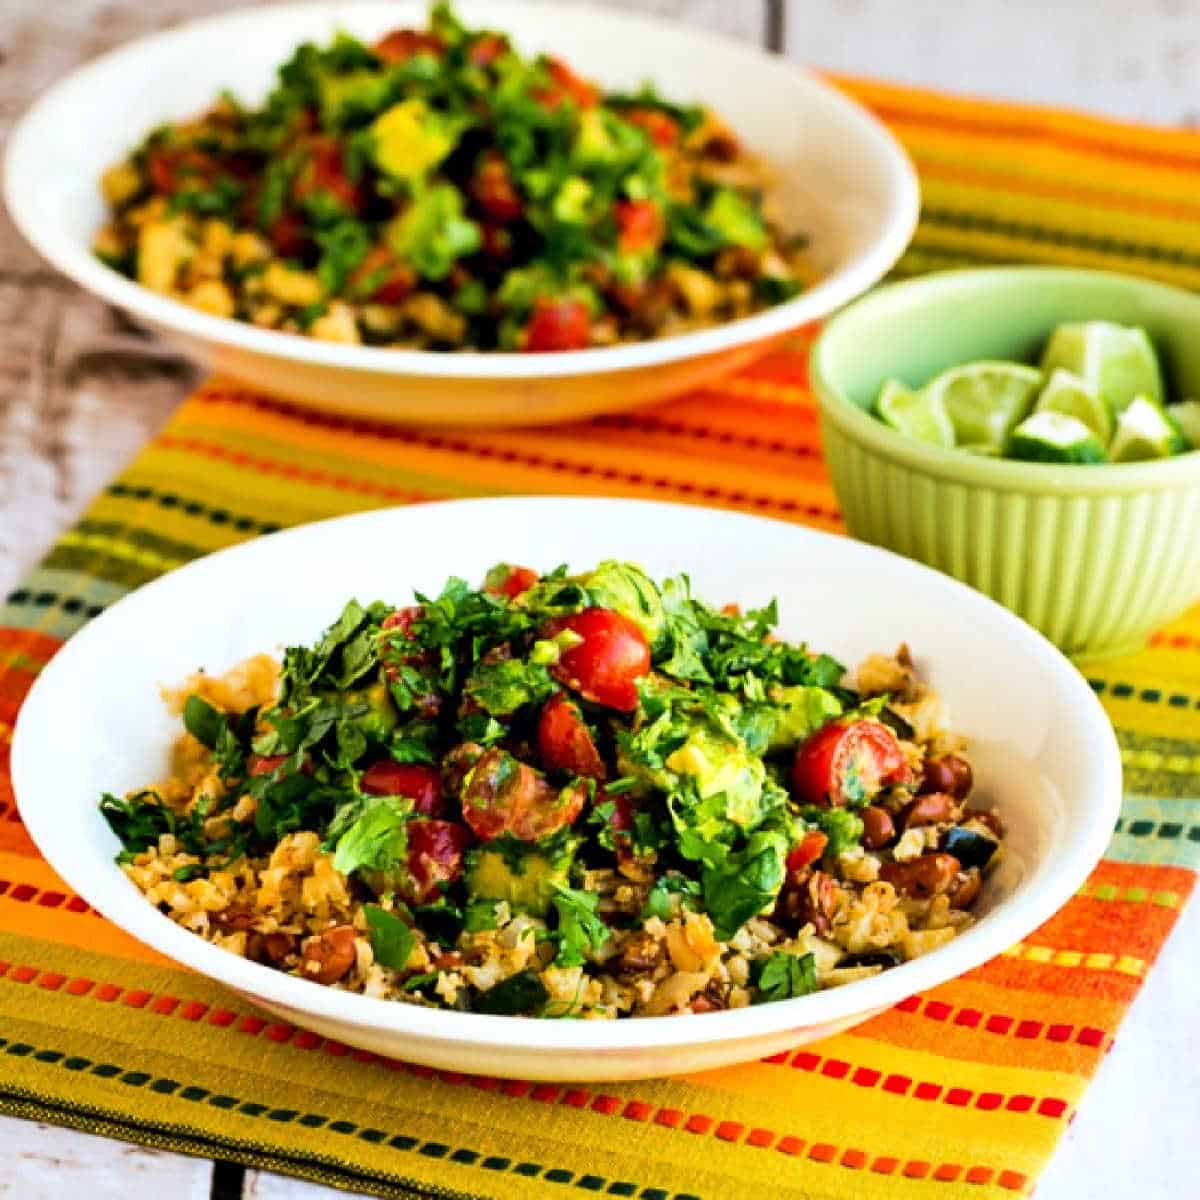 Square image for Cauliflower Rice and Pinto Bean Vegetarian Burrito Bowl shown with two bowls on napkin and bowl of limes on the side.